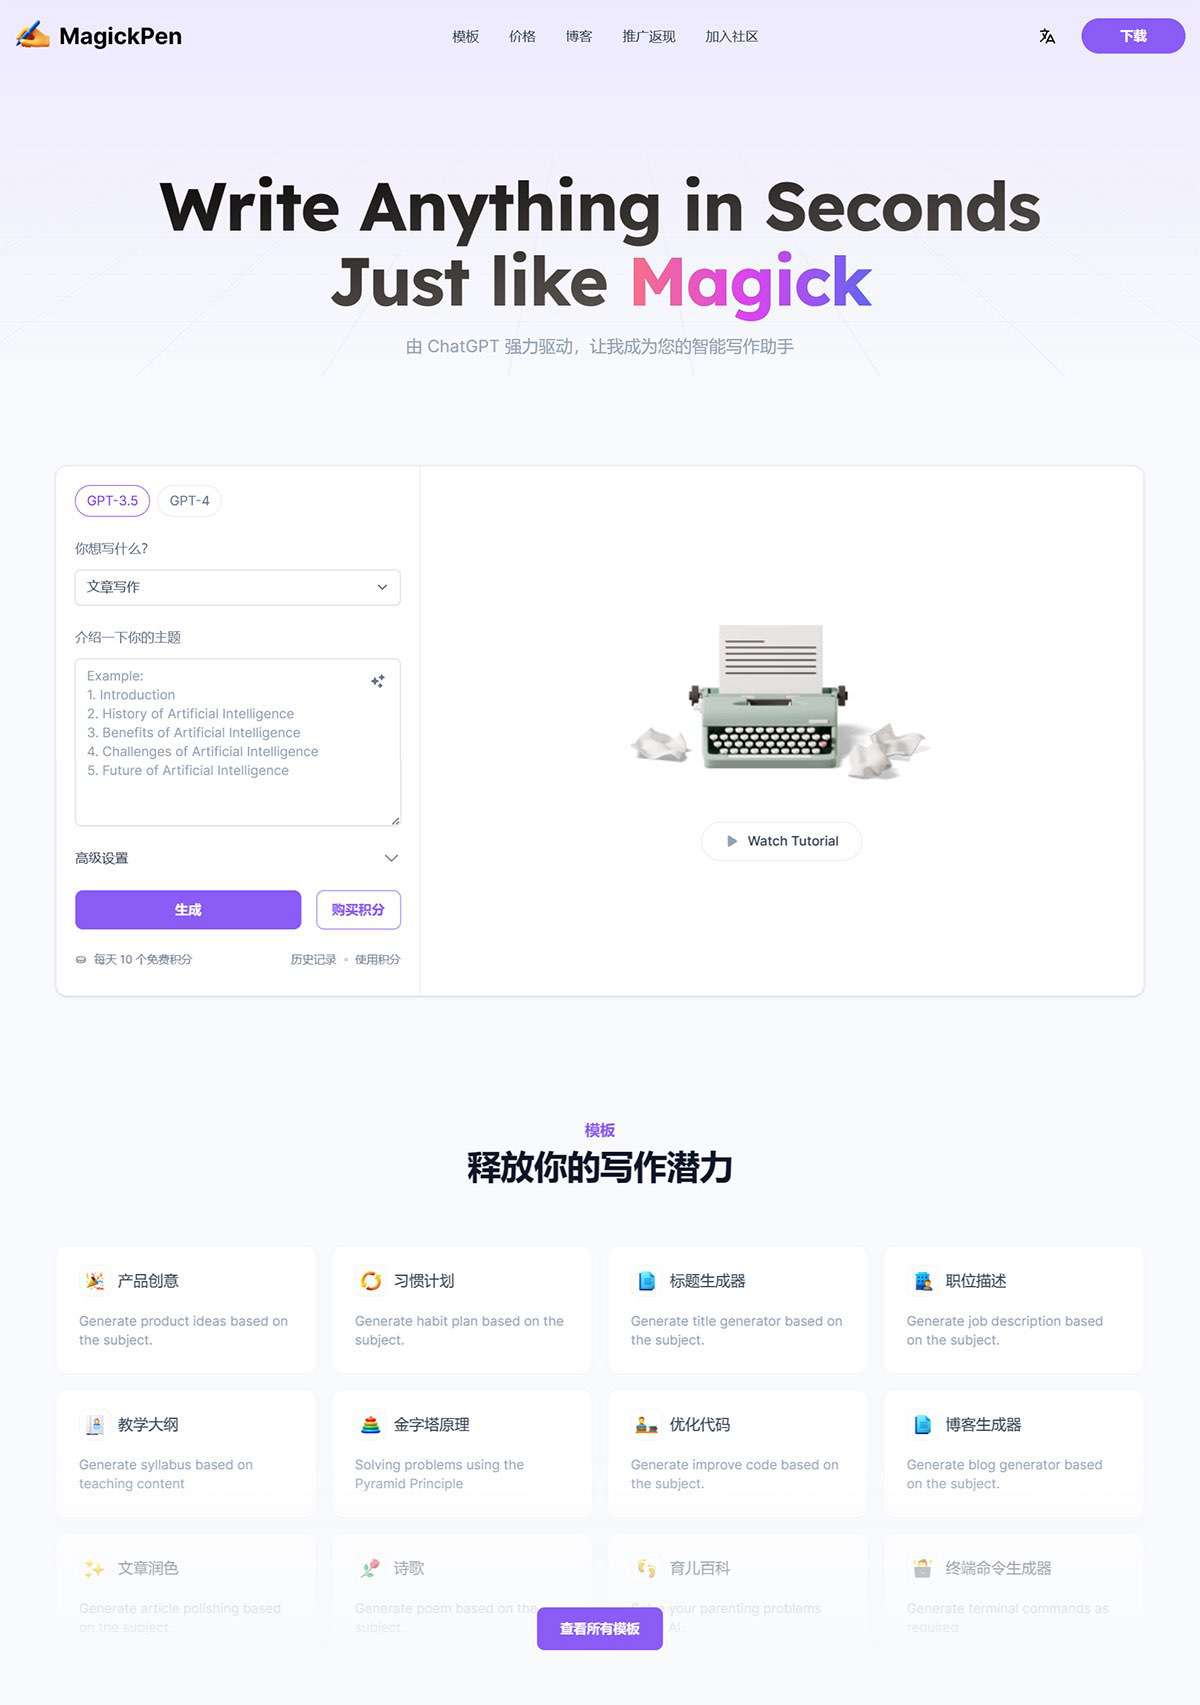 MagickPen---AI-Writing-Assistant,-powered-by-大模型---magickpen.jpg